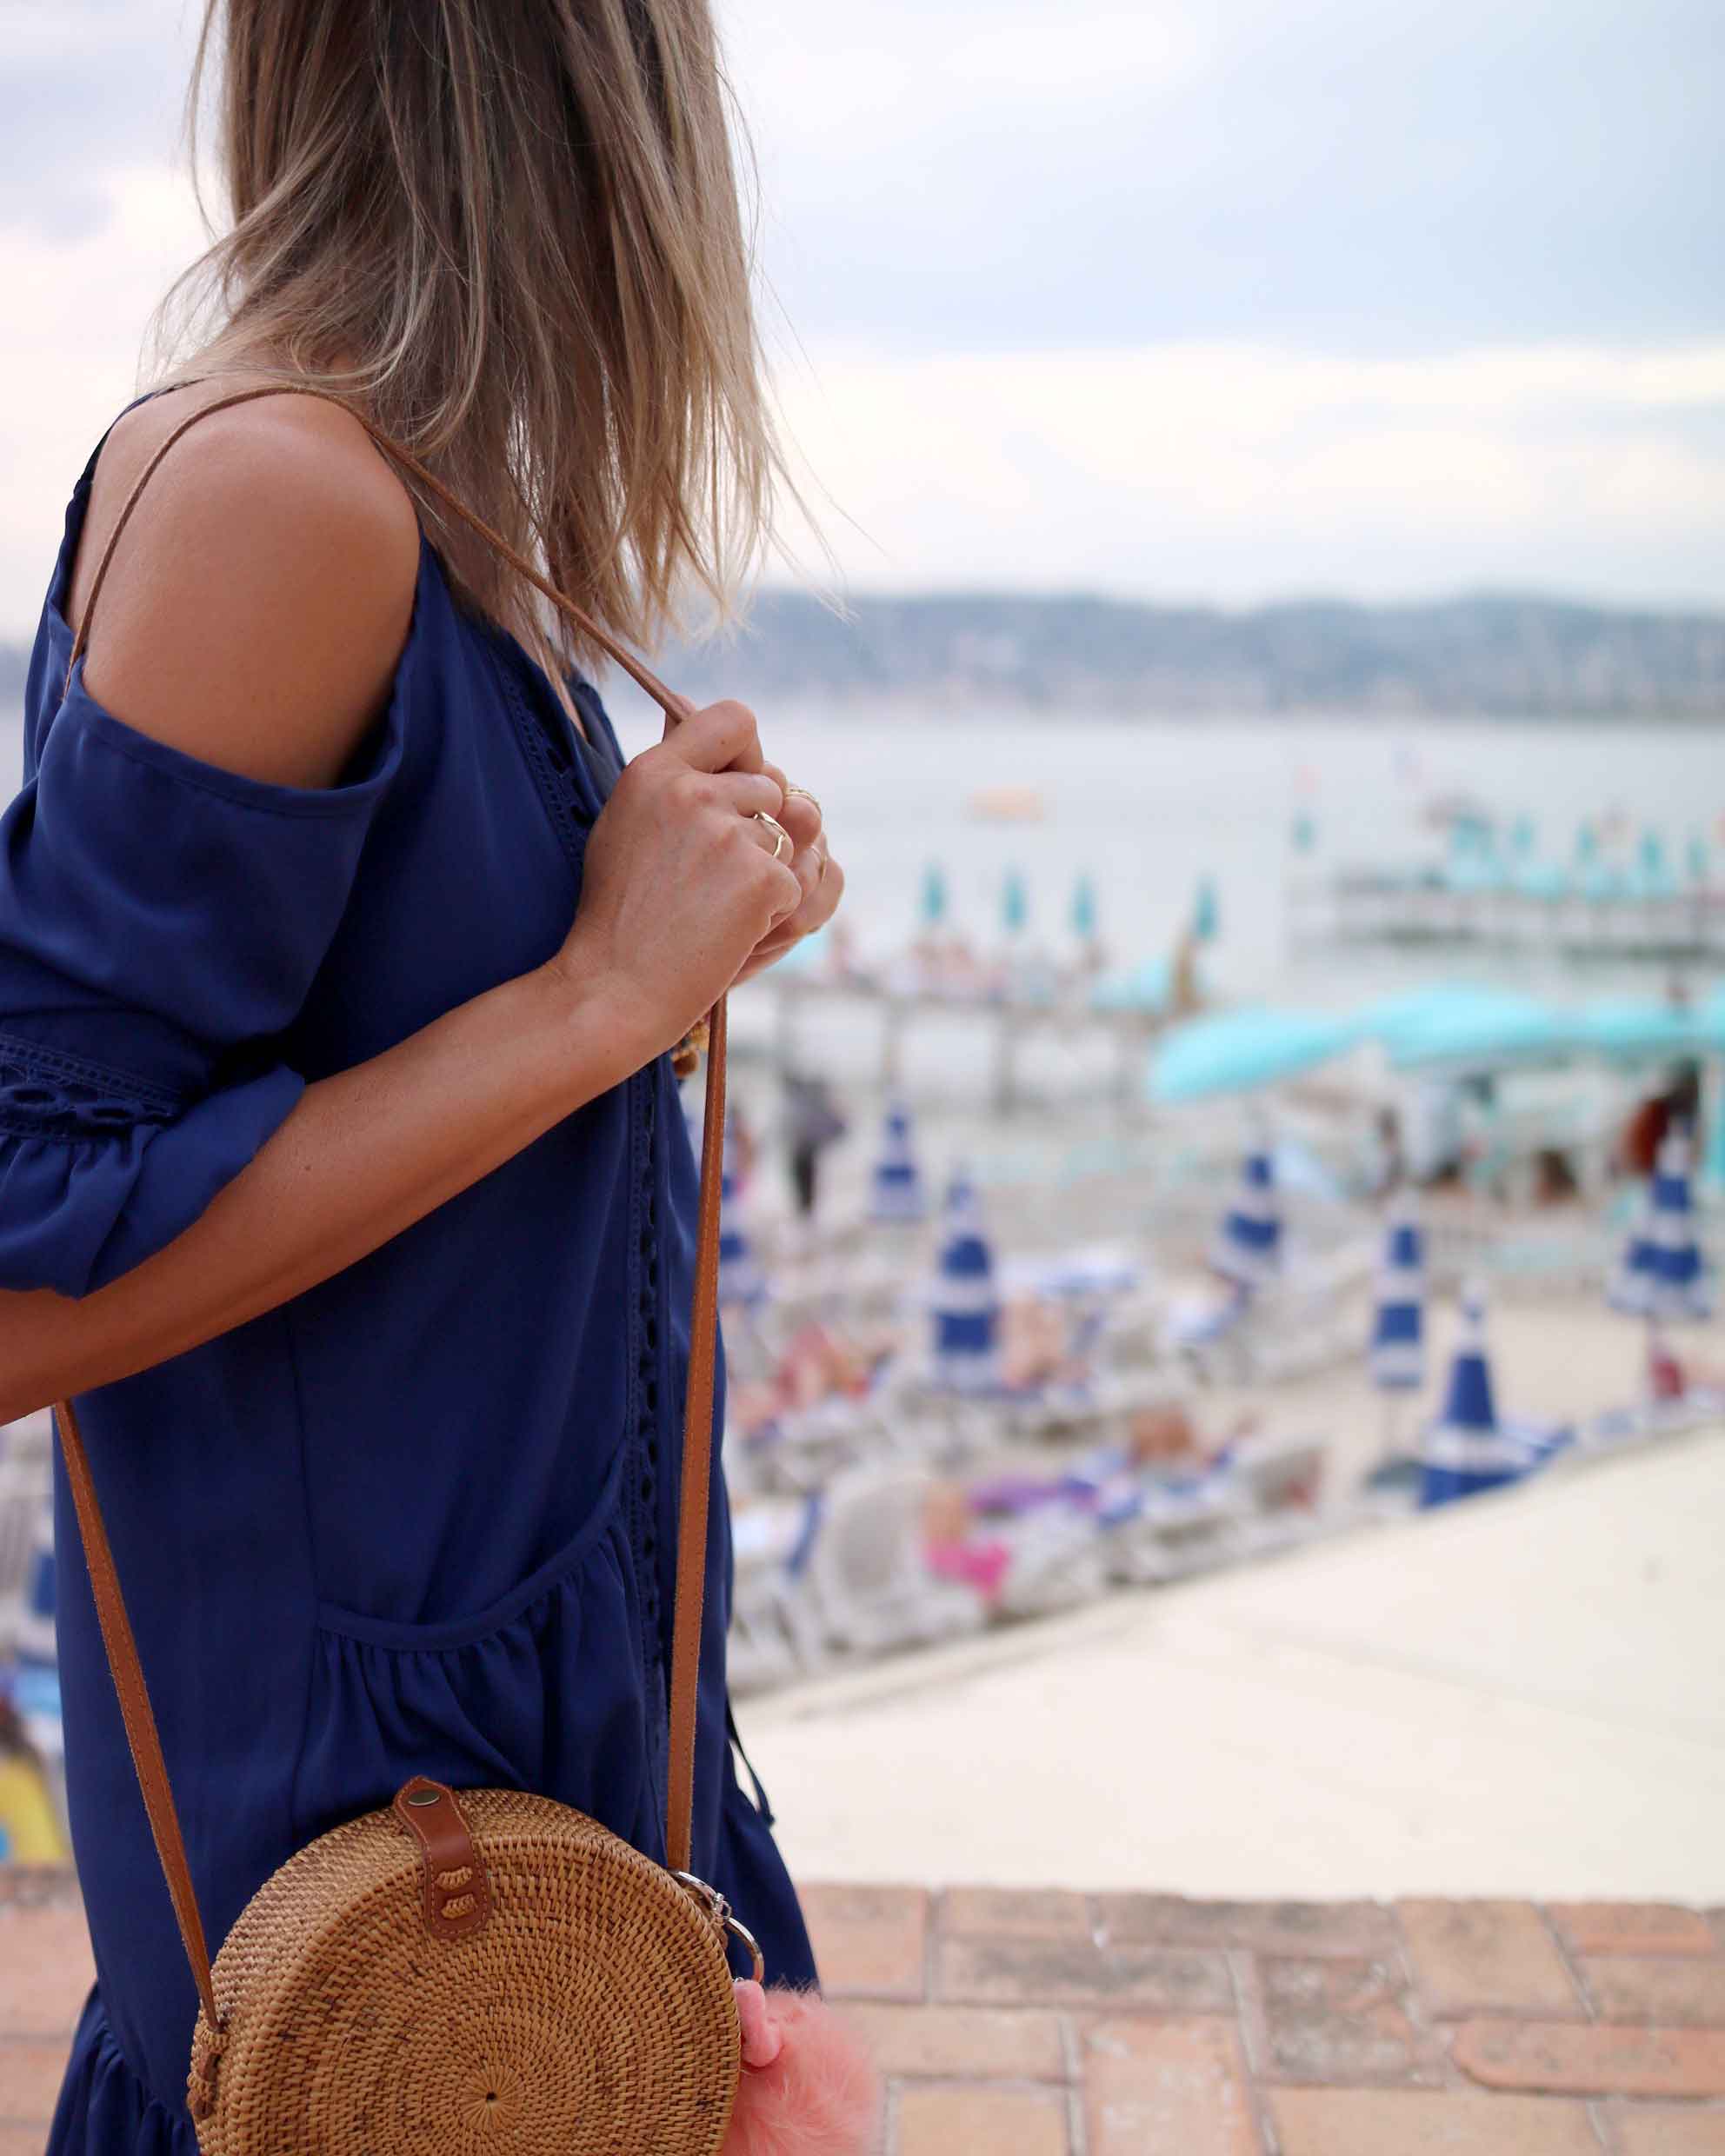 necklaces layering, gold necklaces, blue summer dress with fur converse, bali bag, round bag, sequins military jacket. summer look, summer dress